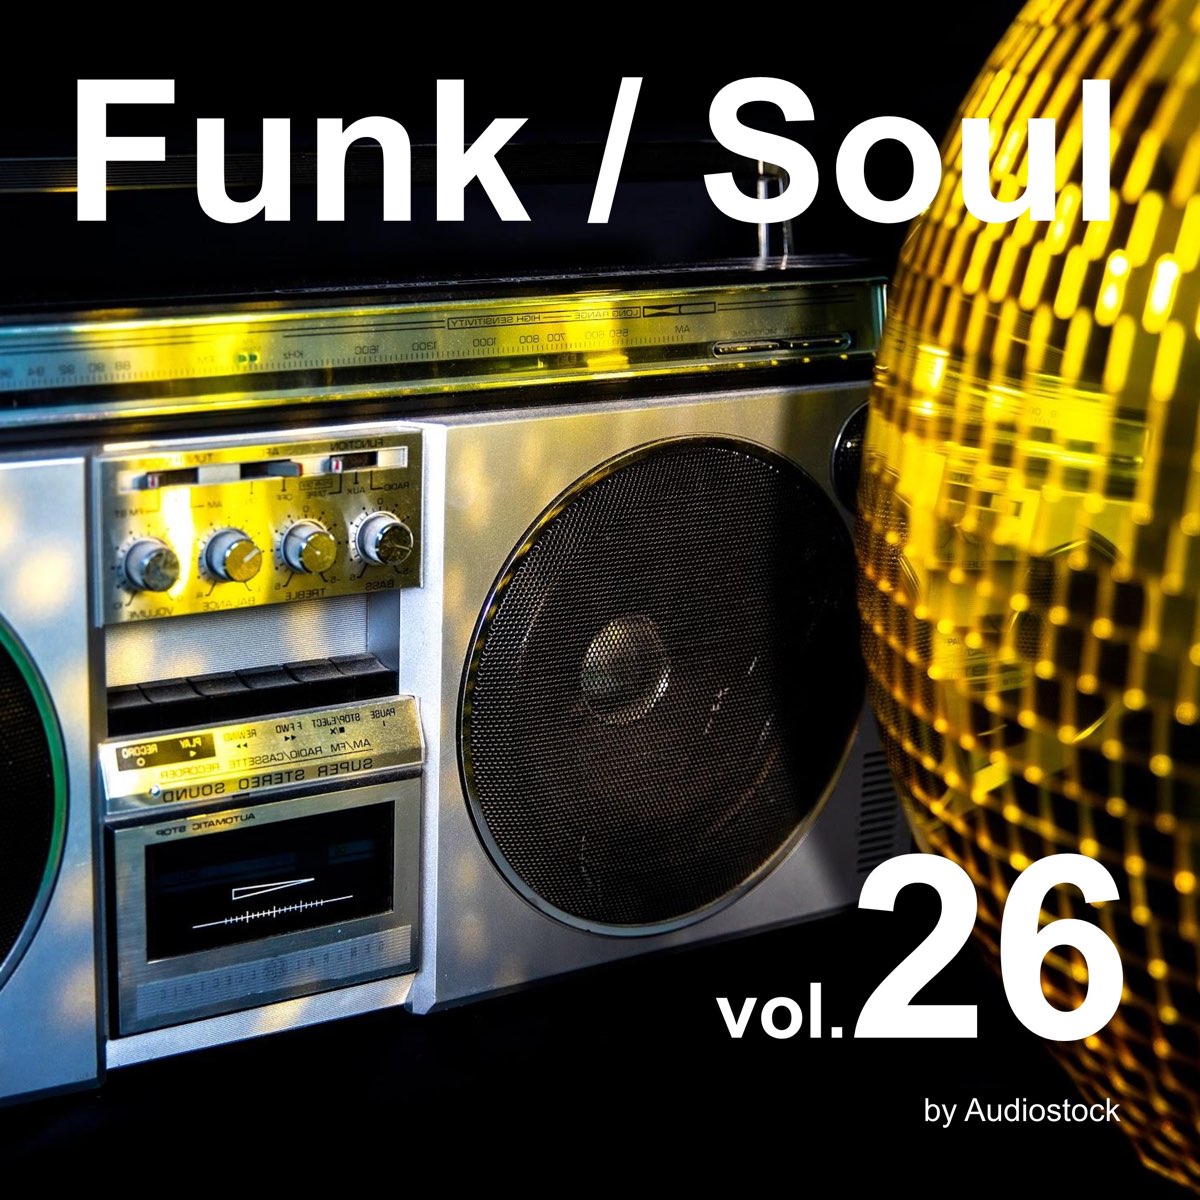 Funk / Soul, Vol. 26 - Instrumental BGM - by Audiostock by Various Artists  on Apple Music